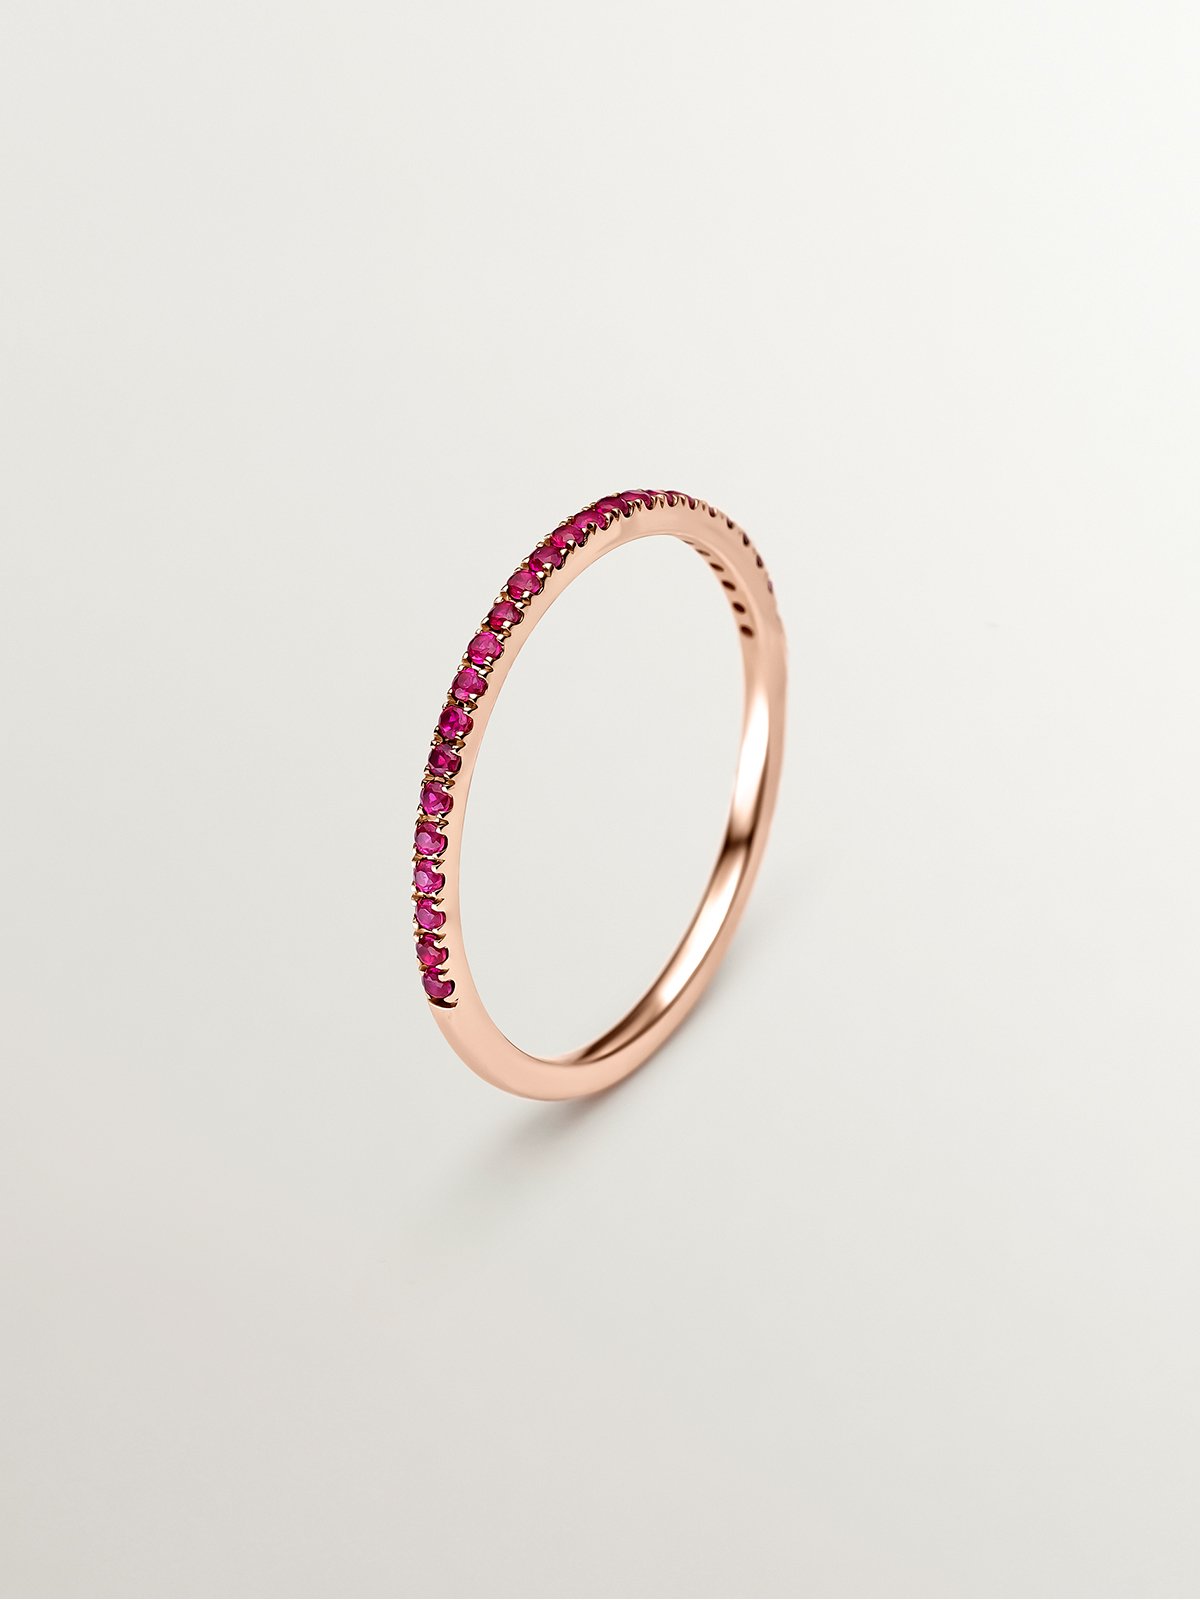 9K Rose Gold Ring with Pink Rubies